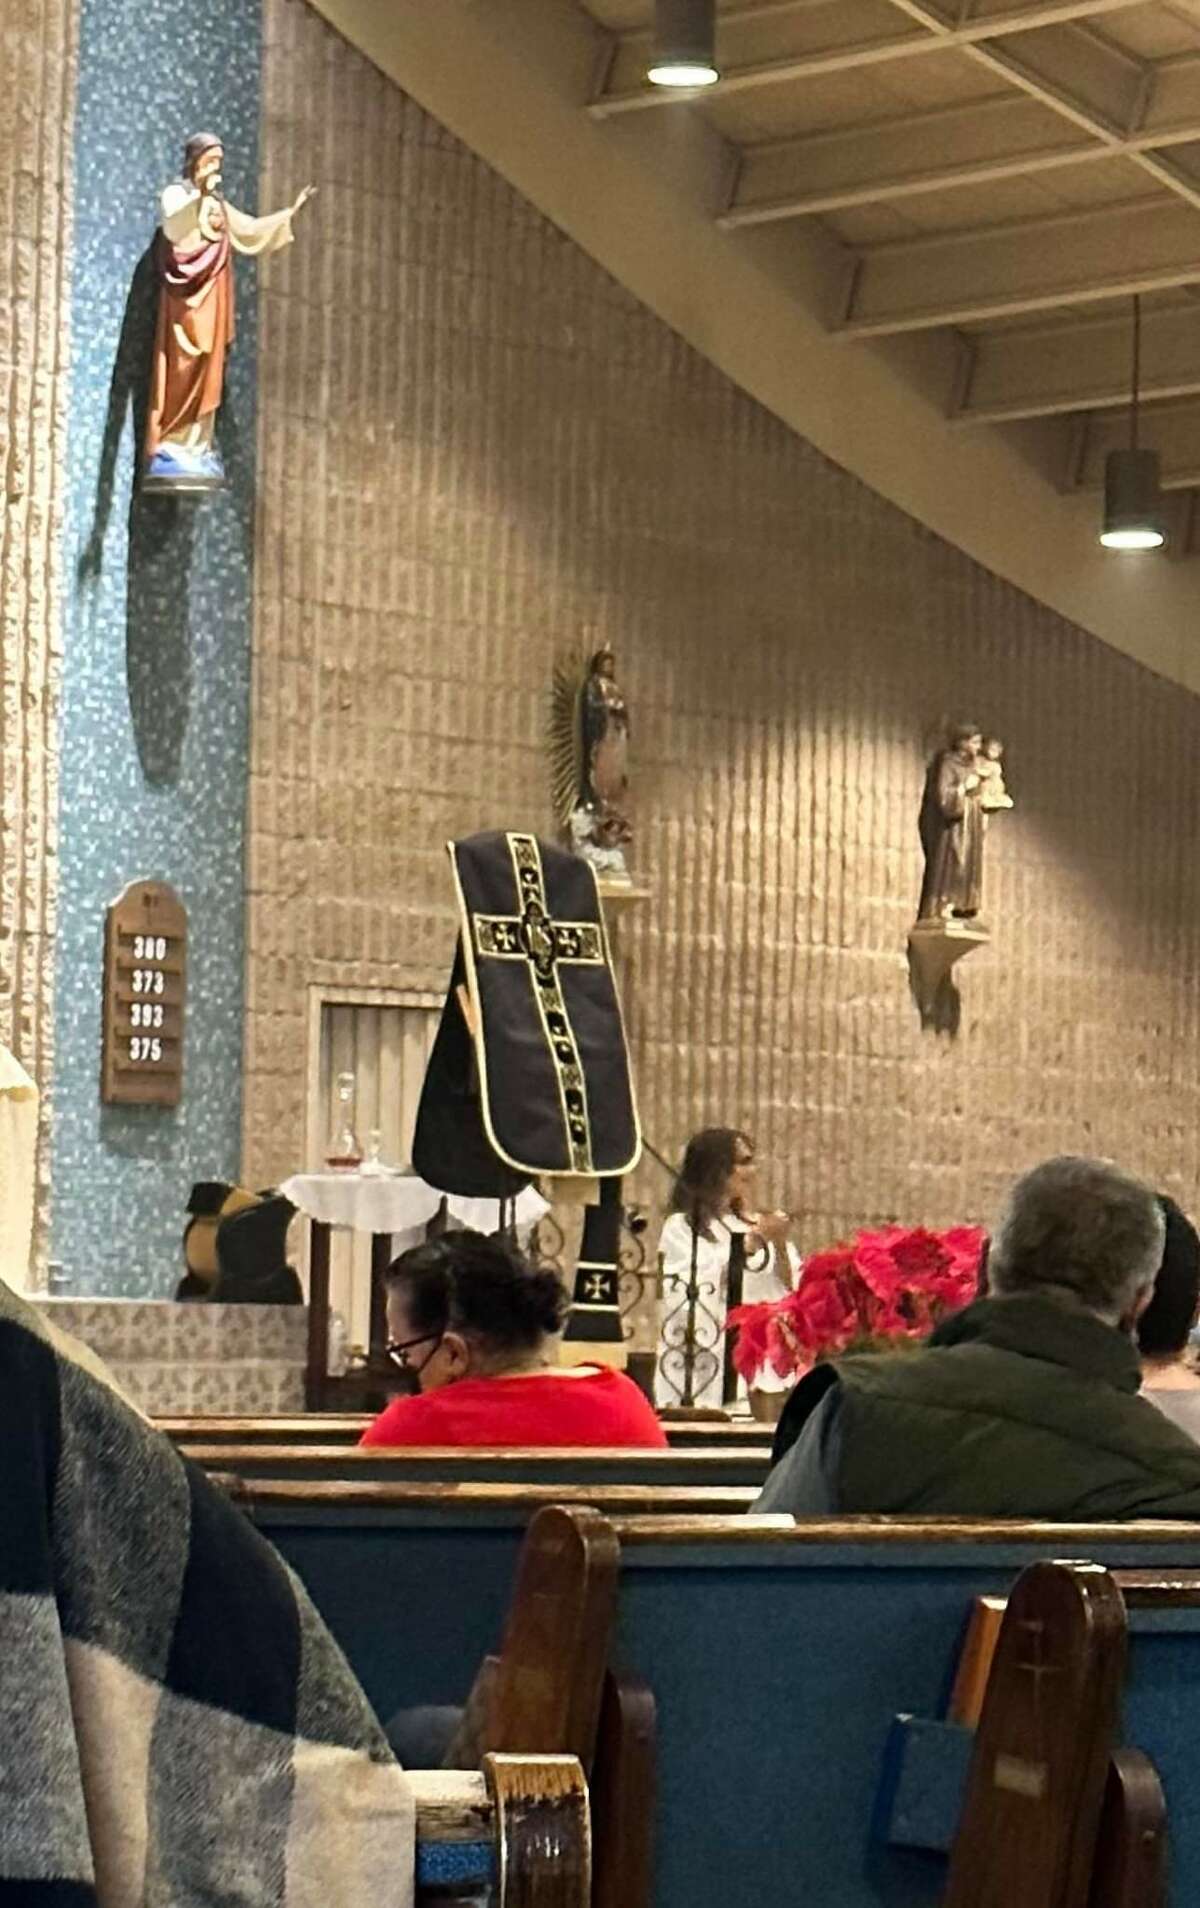 Images from inside St. Frances Cabrini Catholic Church on Jan. 4, 2023 as mass was celebrated in honor of the late Pope Bendict XVI.